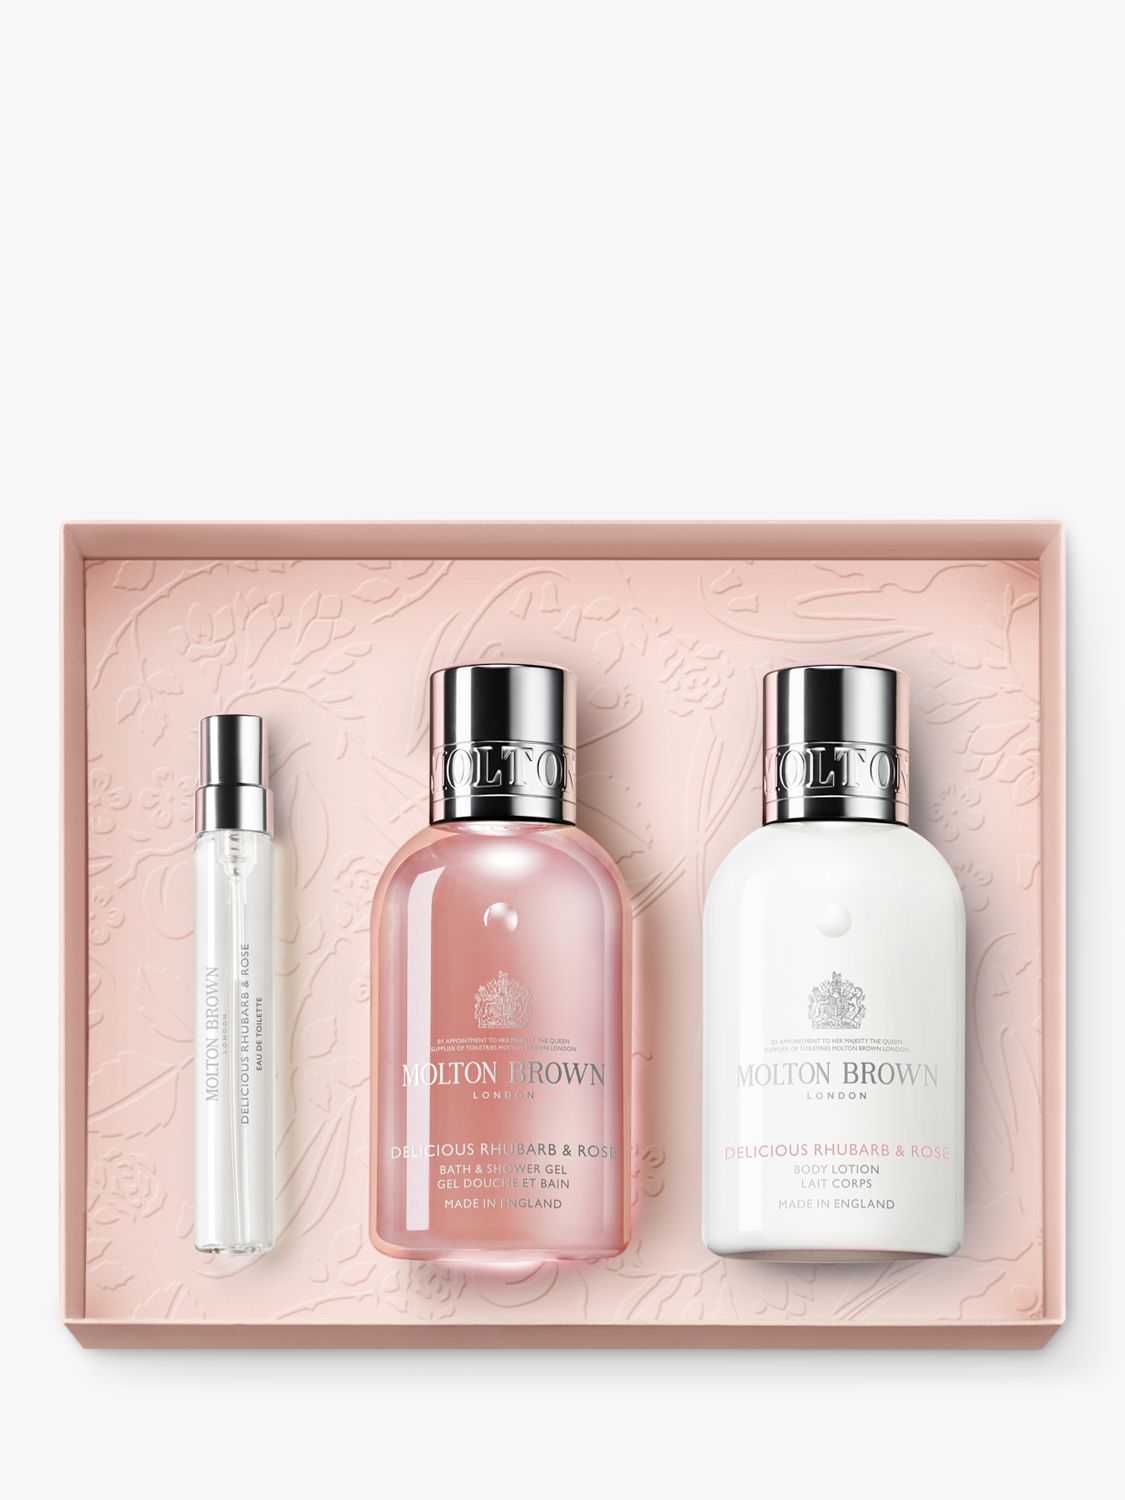 Molton Brown Delicious Rhubarb & Rose Travel Collection Bodycare Gift Set 1